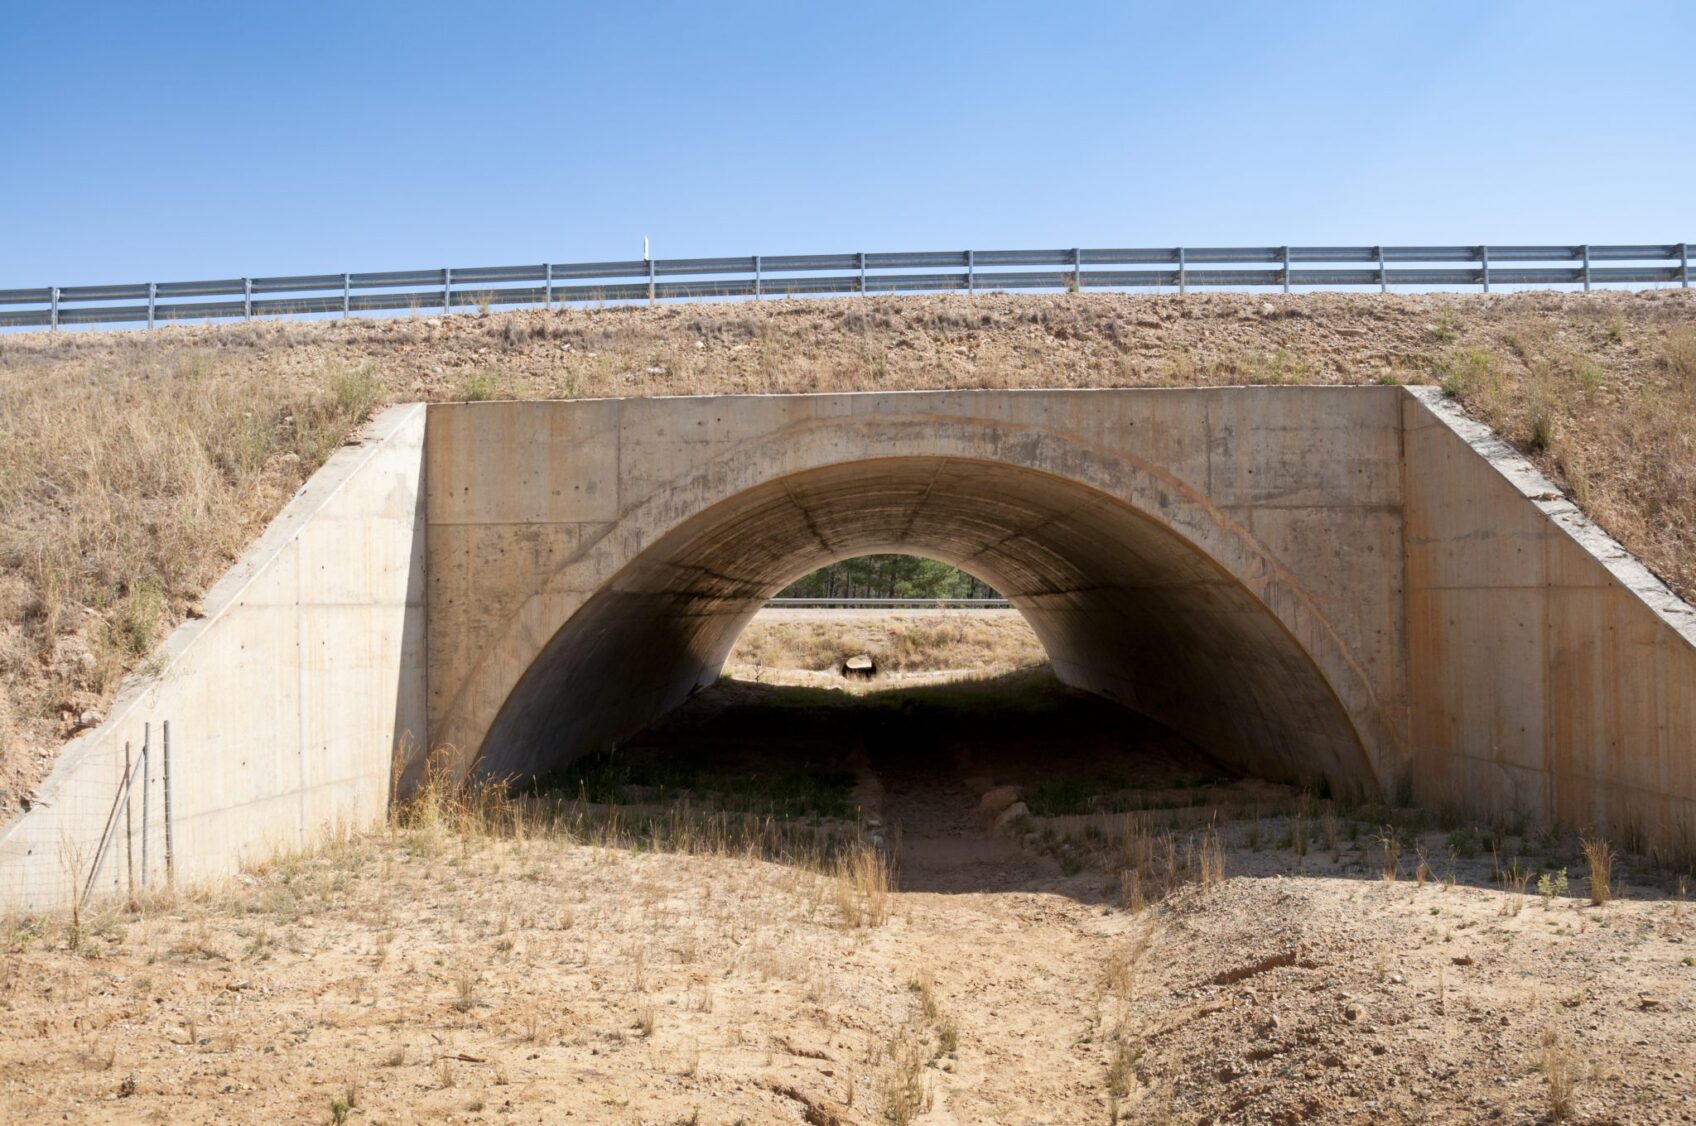 Tucson Plans Several Wildlife Crossings to Decrease Road Accidents